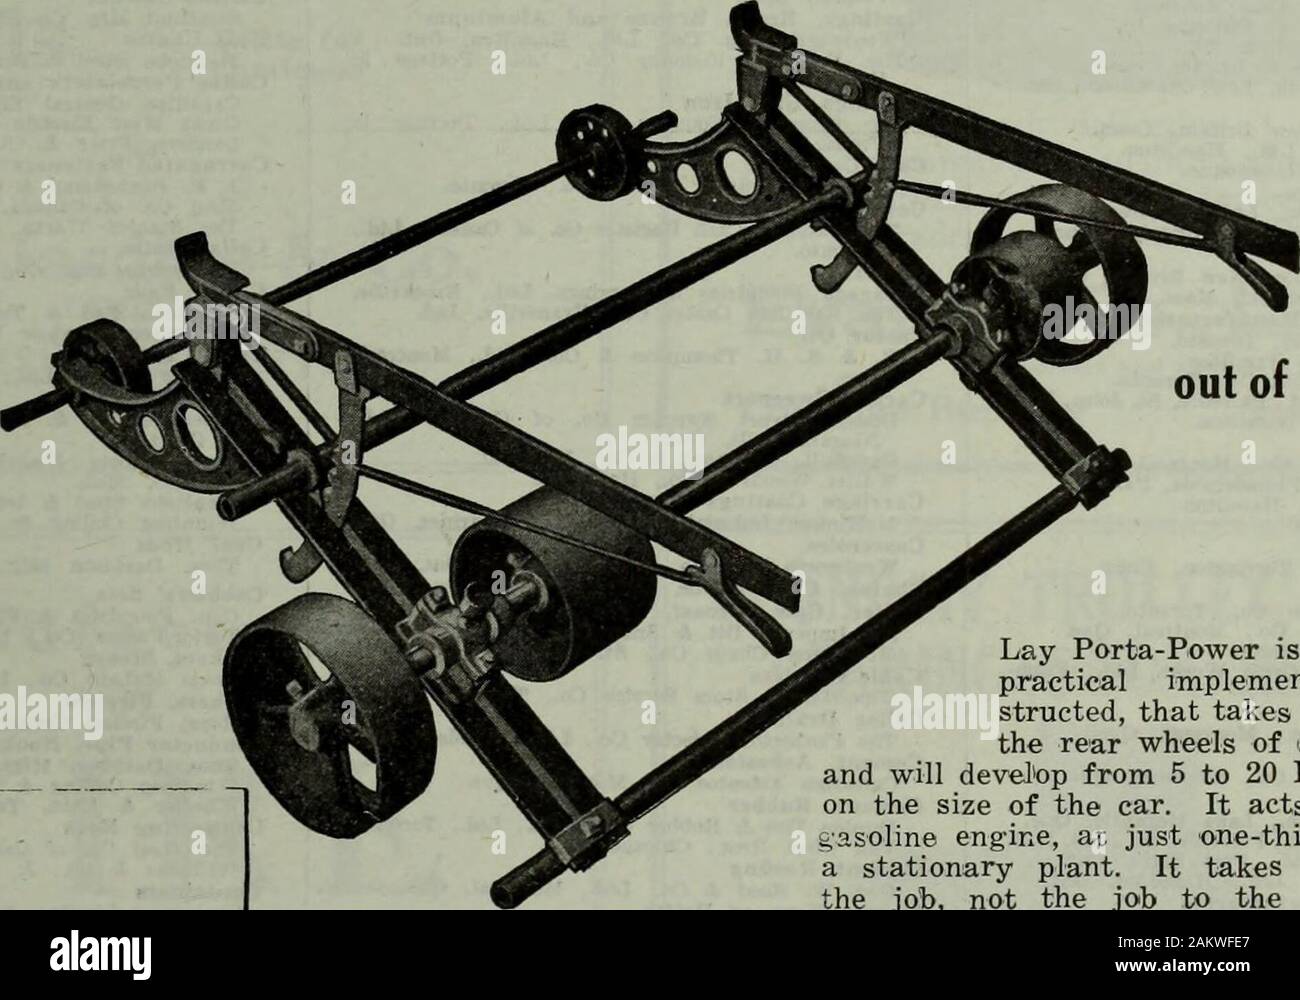 Hardware merchandising September-December 1919 . It takestheArm Workout of Farm Work Lay Porta-Power is a durable andpractical implement, well con-structed, that takes its power fromthe rear wheels of any automobileand will develop from 5 to 20 H.P., dependingon the size of the car. It acts as a portablegasoline engine, at just one-third the cost ofa stationary plant. It takes the engine tothe job, not the job to the engine. Woodsawing, feed grinding and cutting, pumping, ensilage cutting, silo filling andfarm lighting are only a few of the farm jobs that this implement can be readilyused for. Stock Photo